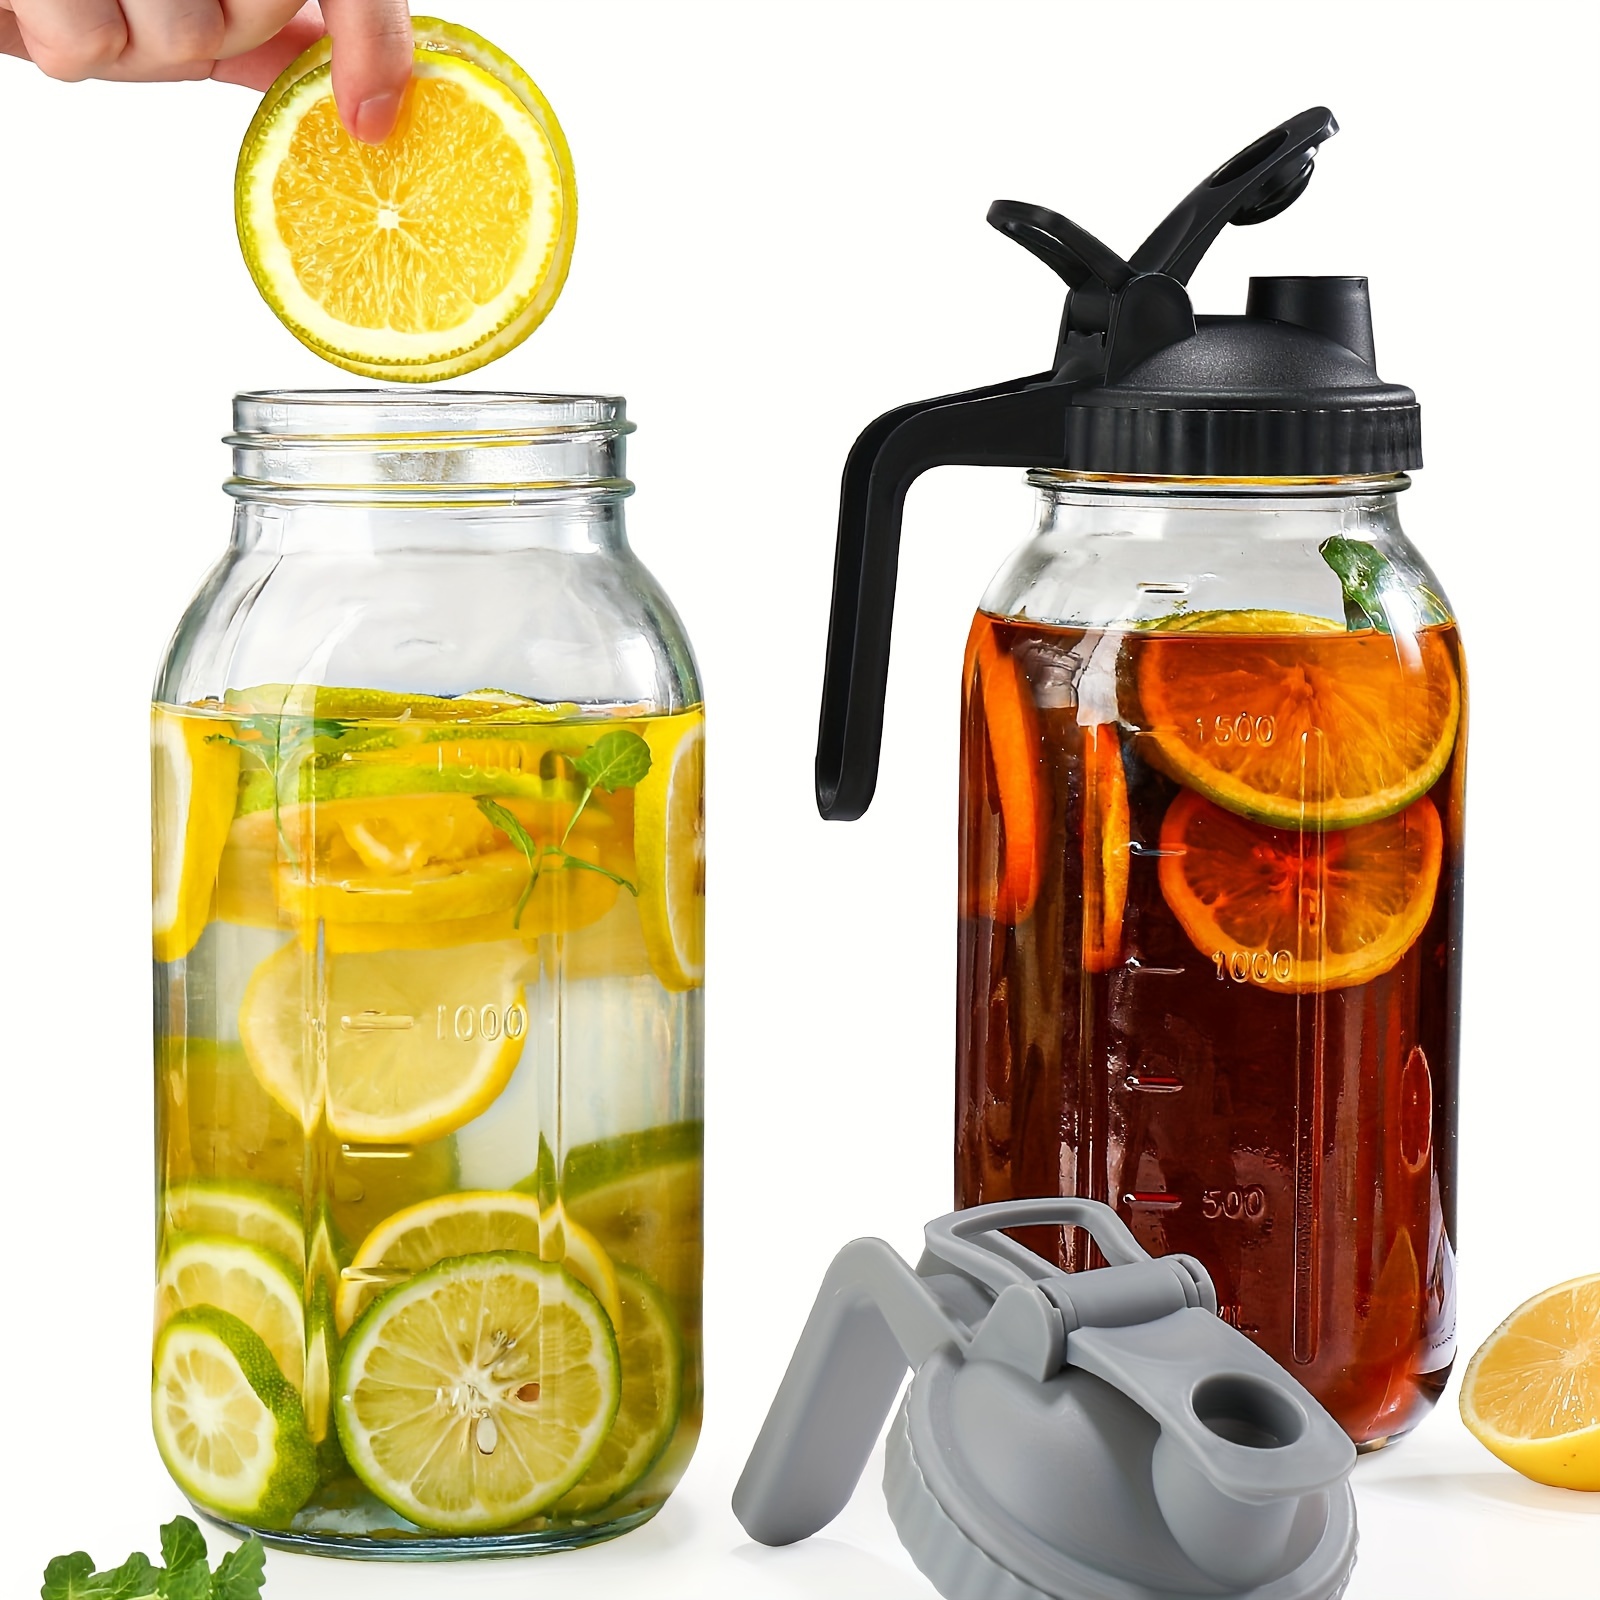 

2pcs, 64oz Glass Pitchers With Lids, Large Glass Bottles, Jar Pitcher For Iced Tea, Coffee, Juice, Glass Jars With Lids (black And Gray Lid)